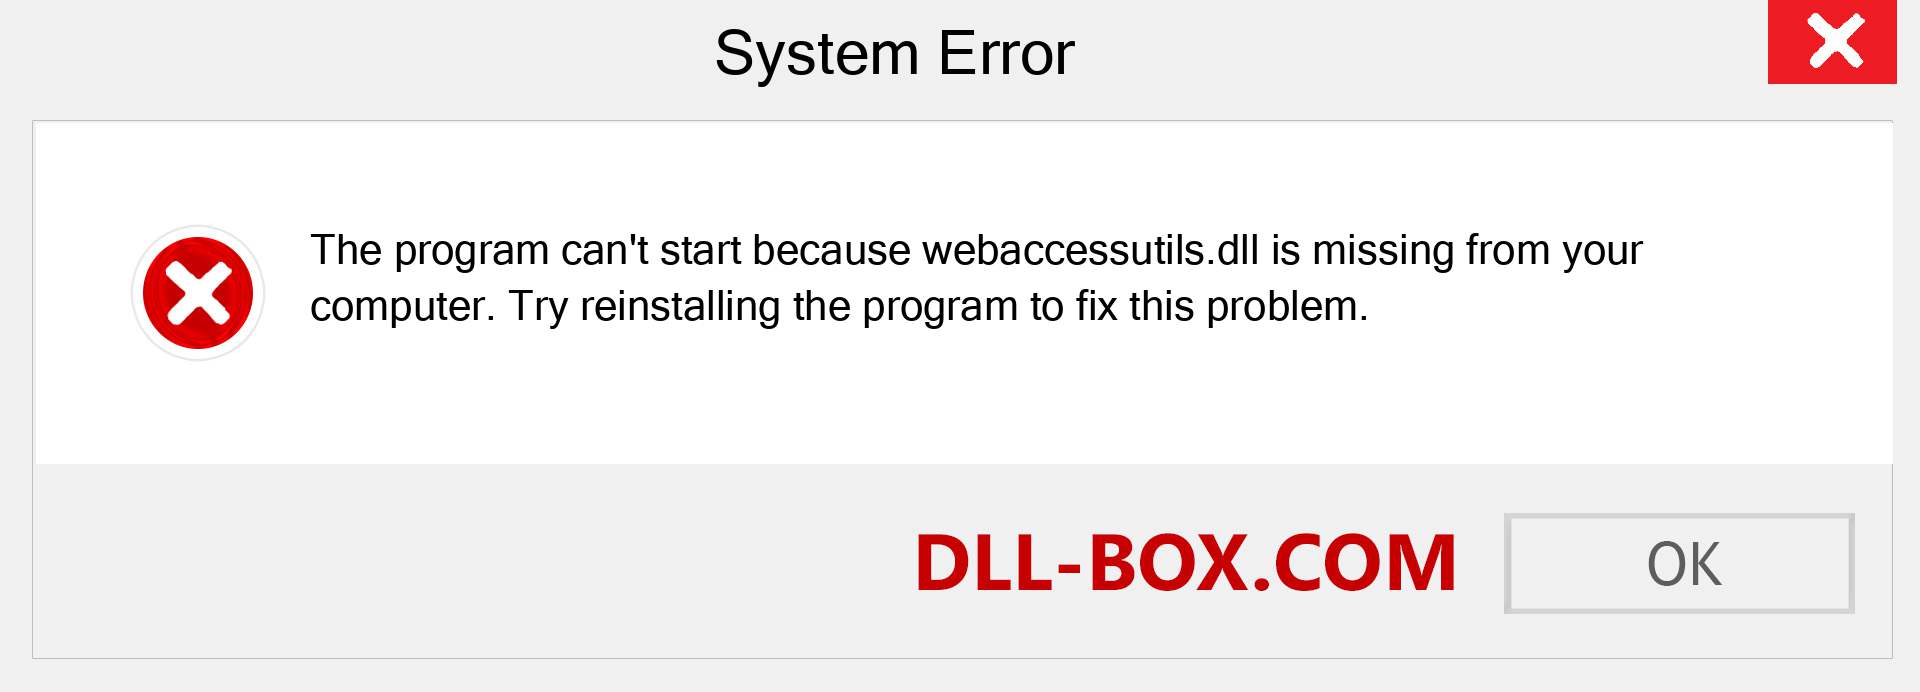  webaccessutils.dll file is missing?. Download for Windows 7, 8, 10 - Fix  webaccessutils dll Missing Error on Windows, photos, images